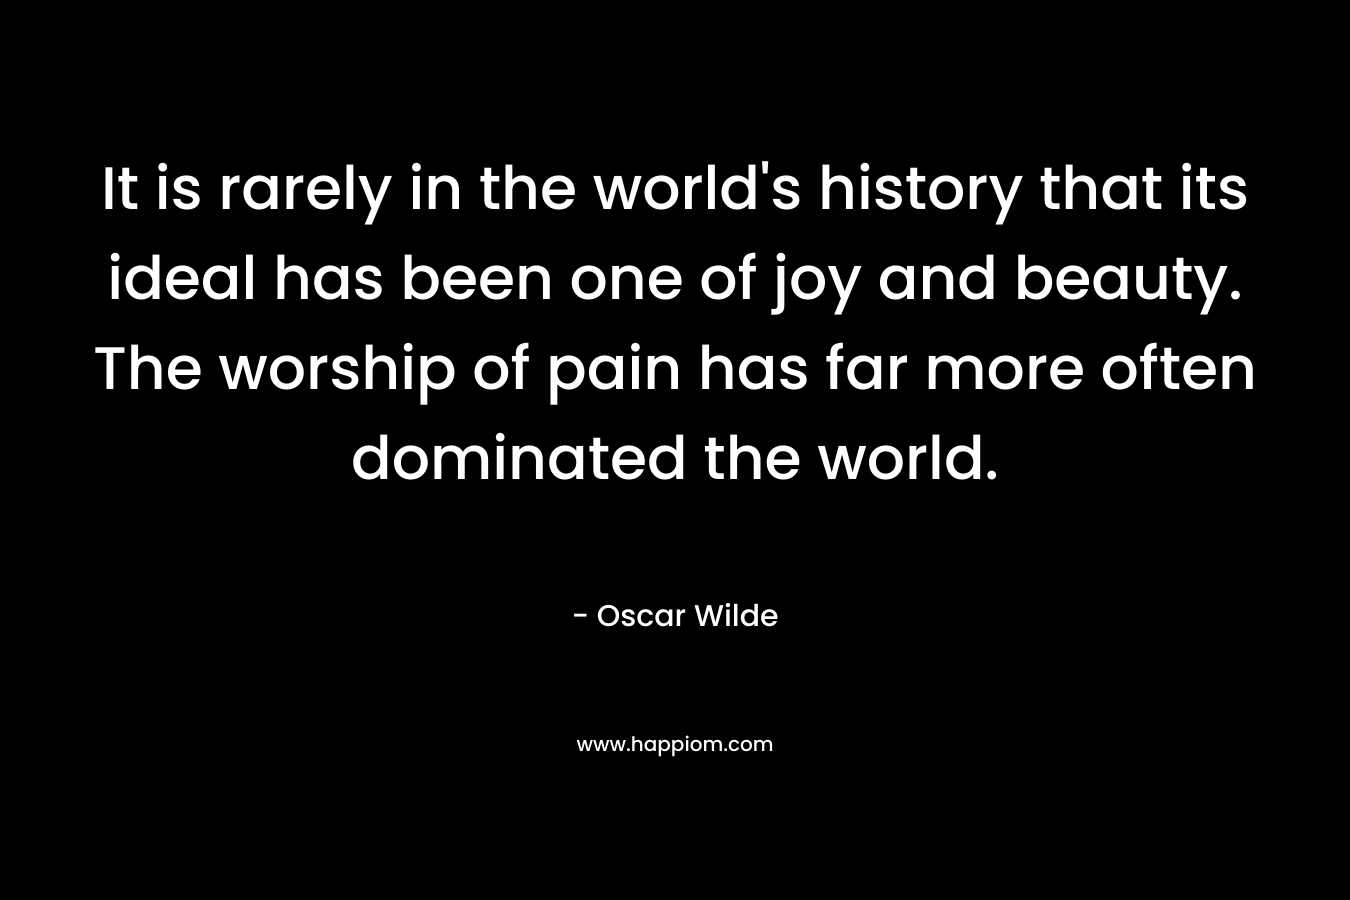 It is rarely in the world's history that its ideal has been one of joy and beauty. The worship of pain has far more often dominated the world.